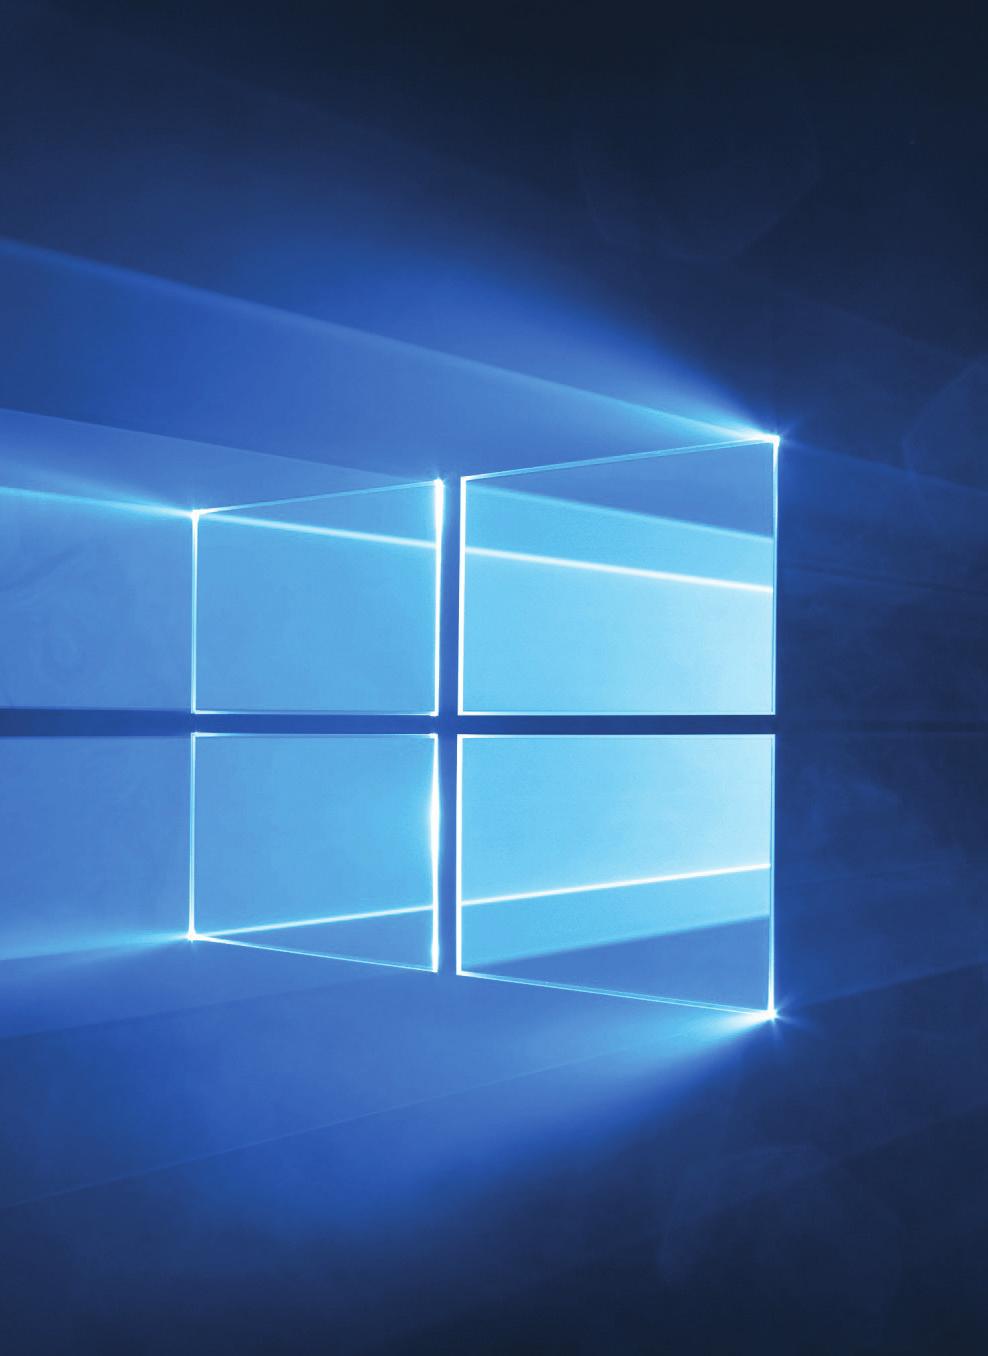 Why Migrating to Windows 10 Matters Between 2009 the year Windows 7 was first released and 2018 there have been over 2,500 reported healthcare data breaches each year that have involved the theft of